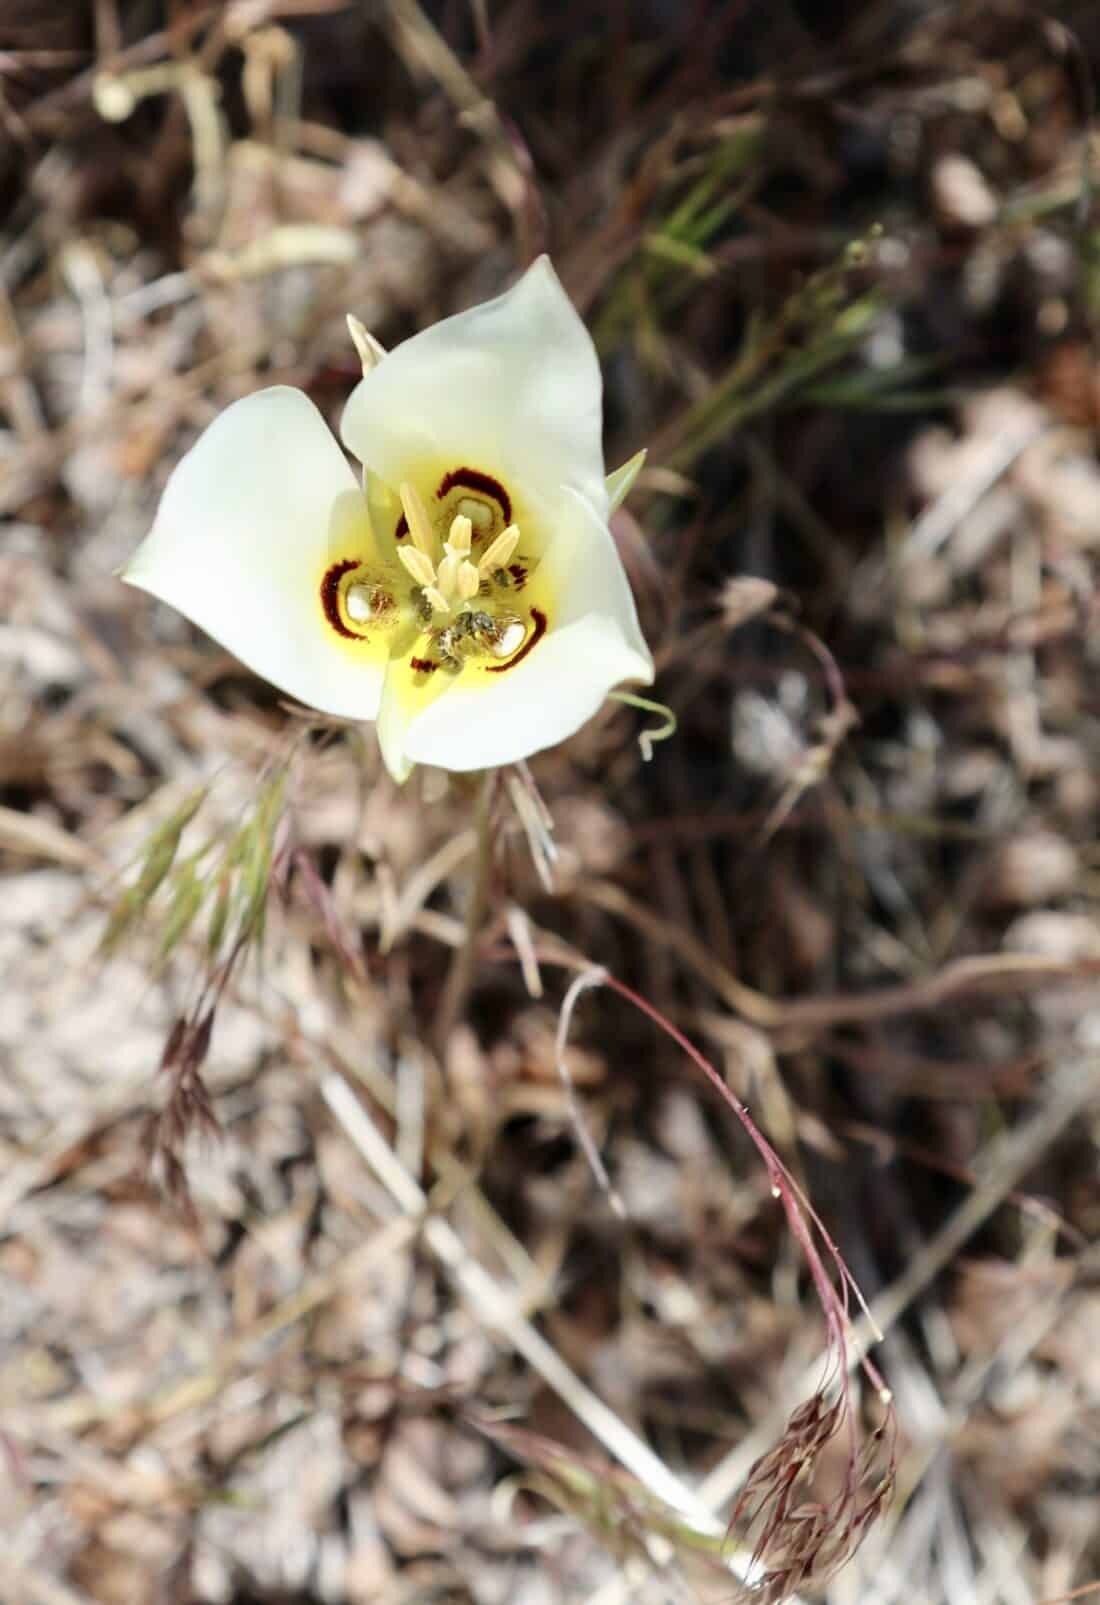 A white flower with a yellow center.